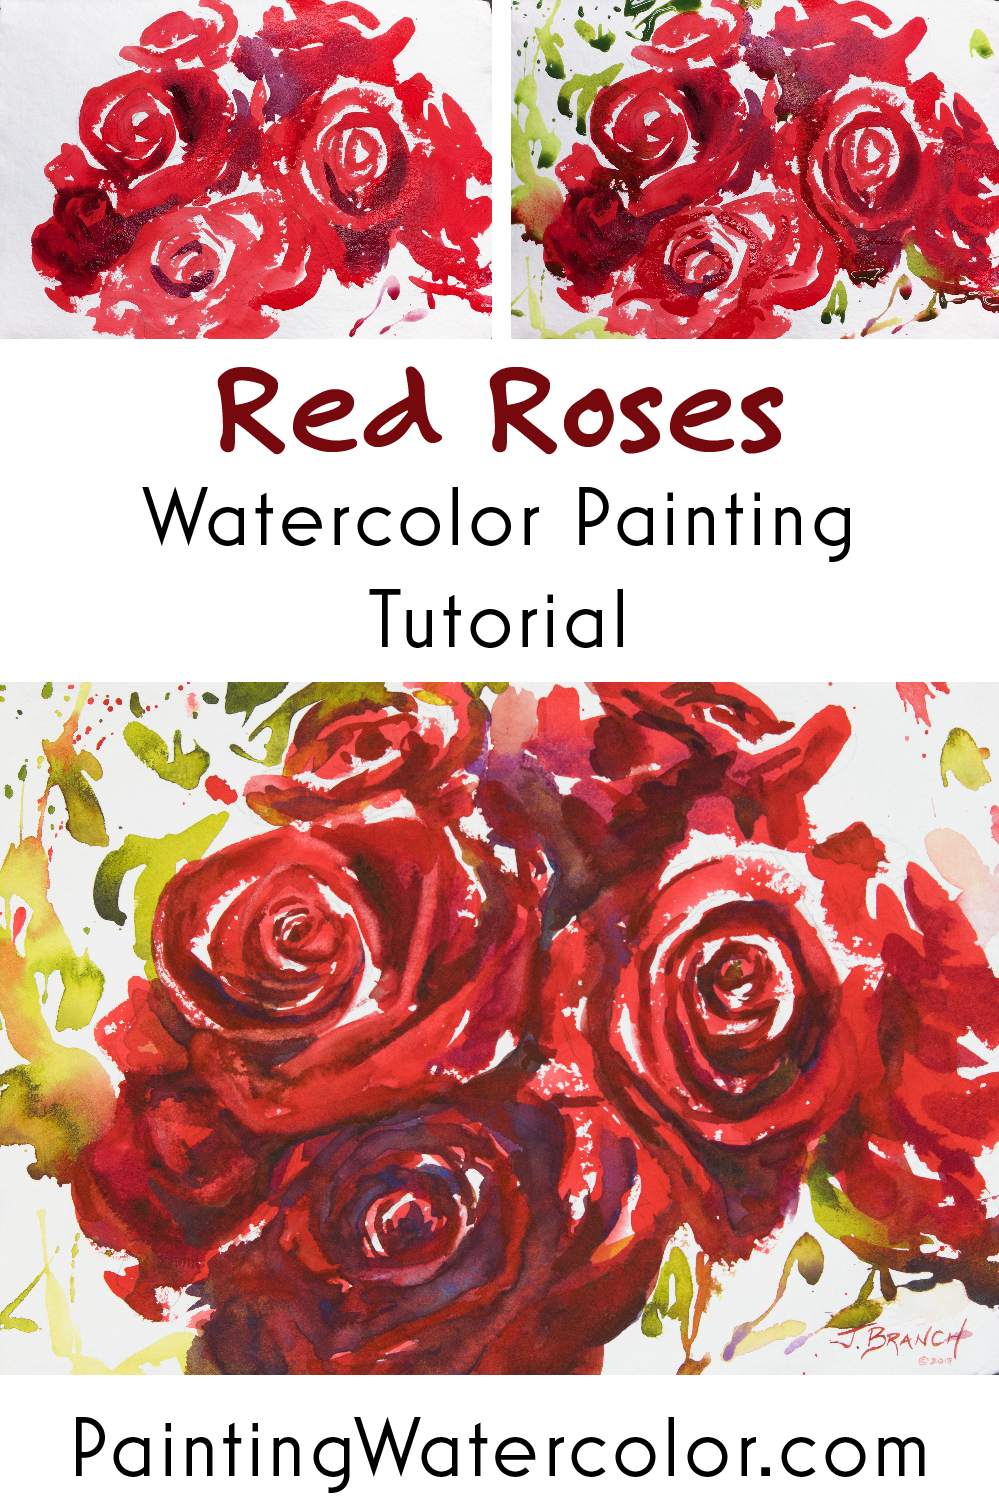 Red Roses Painting Tutorial watercolor painting tutorial by Jennifer Branch